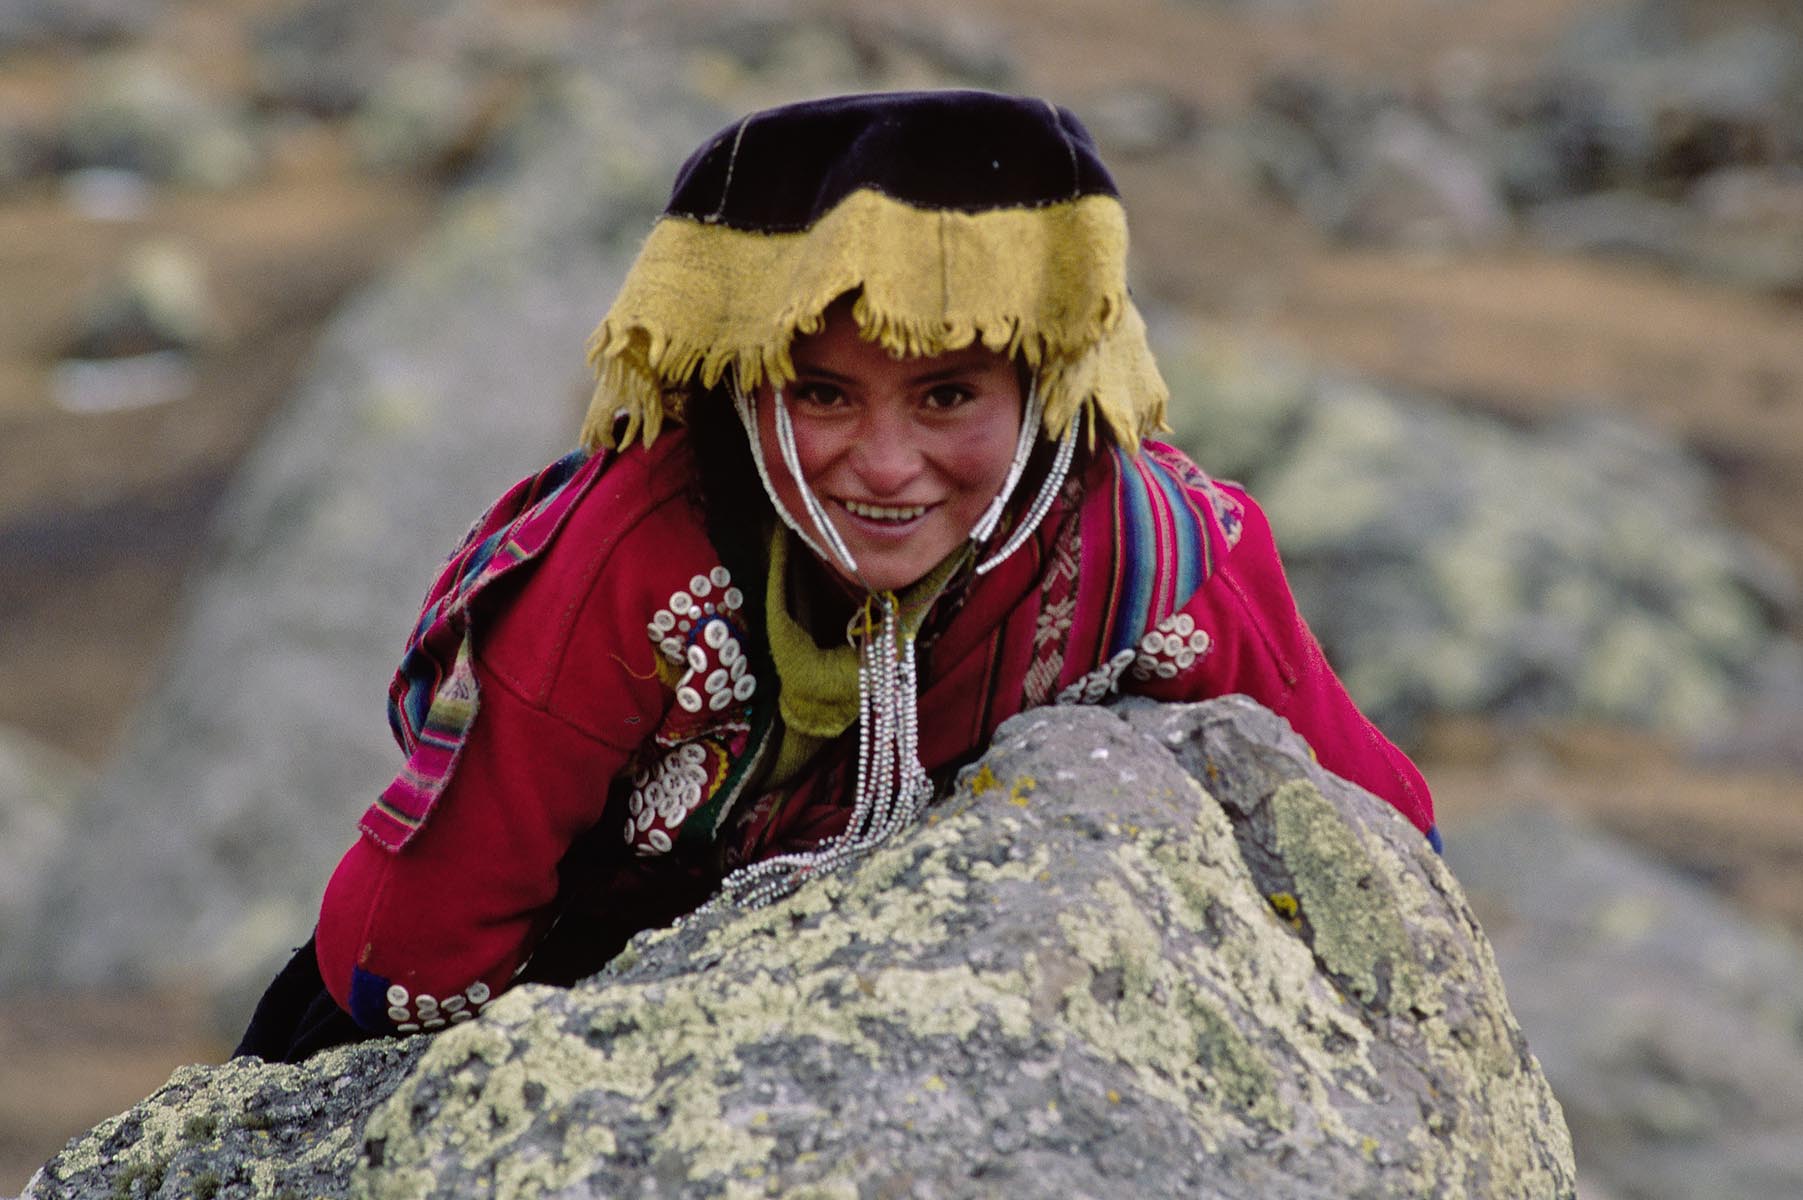 Young QUECHUA beauty calls the high Altiplano near AUZANGATE home - PERUVIAN ANDES